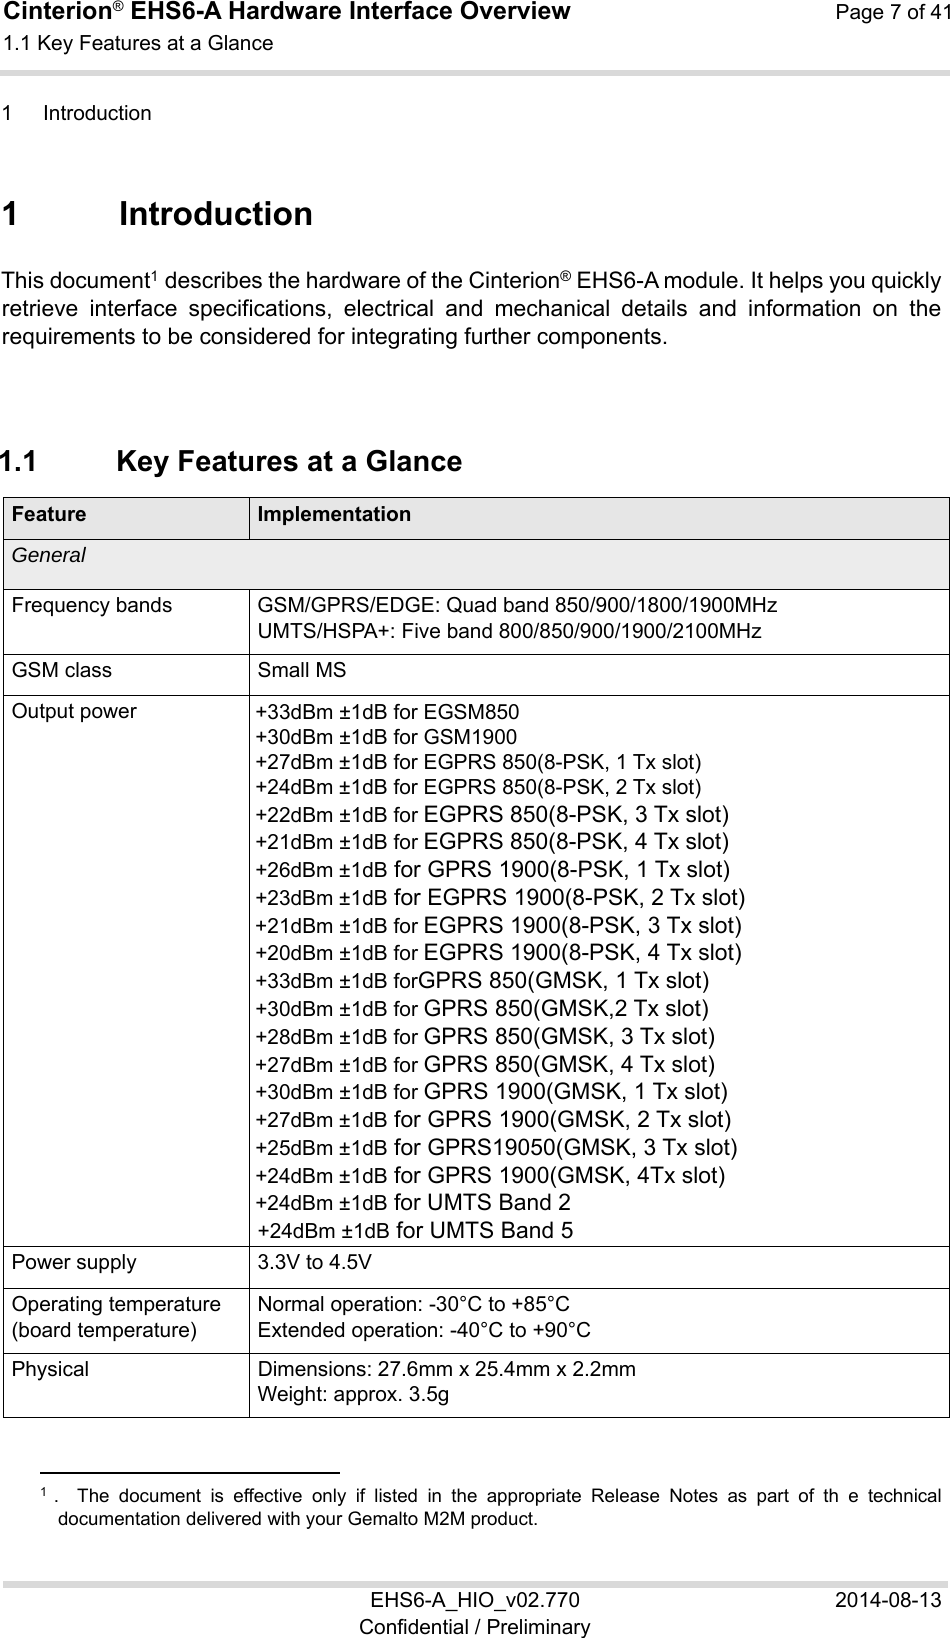 Cinterion® EHS6-A Hardware Interface Overview  Page 7 of 41 1.1 Key Features at a Glance 10 EHS6-A_HIO_v02.770  2014-08-13 Confidential / Preliminary 1  Introduction 10 1  Introduction This document1 describes the hardware of the Cinterion® EHS6-A module. It helps you quickly retrieve  interface  specifications,  electrical  and  mechanical  details  and  information  on  the requirements to be considered for integrating further components. 1.1  Key Features at a Glance Feature ImplementationGeneral  Frequency bands GSM/GPRS/EDGE: Quad band 850/900/1800/1900MHz UMTS/HSPA+: Five band 800/850/900/1900/2100MHz GSM class Small MS Output power +33dBm ±1dB for EGSM850 +30dBm ±1dB for GSM1900  +27dBm ±1dB for EGPRS 850(8-PSK, 1 Tx slot)  +24dBm ±1dB for EGPRS 850(8-PSK, 2 Tx slot)  +22dBm ±1dB for EGPRS 850(8-PSK, 3 Tx slot)  +21dBm ±1dB for EGPRS 850(8-PSK, 4 Tx slot)  +26dBm ±1dB for GPRS 1900(8-PSK, 1 Tx slot) +23dBm ±1dB for EGPRS 1900(8-PSK, 2 Tx slot)  +21dBm ±1dB for EGPRS 1900(8-PSK, 3 Tx slot)  +20dBm ±1dB for EGPRS 1900(8-PSK, 4 Tx slot)  +33dBm ±1dB forGPRS 850(GMSK, 1 Tx slot)  +30dBm ±1dB for GPRS 850(GMSK,2 Tx slot)  +28dBm ±1dB for GPRS 850(GMSK, 3 Tx slot)  +27dBm ±1dB for GPRS 850(GMSK, 4 Tx slot) +30dBm ±1dB for GPRS 1900(GMSK, 1 Tx slot) +27dBm ±1dB for GPRS 1900(GMSK, 2 Tx slot) +25dBm ±1dB for GPRS19050(GMSK, 3 Tx slot) +24dBm ±1dB for GPRS 1900(GMSK, 4Tx slot) +24dBm ±1dB for UMTS Band 2 +24dBm ±1dB for UMTS Band 5 Power supply 3.3V to 4.5VOperating temperature (board temperature) Normal operation: -30°C to +85°C Extended operation: -40°C to +90°C Physical Dimensions: 27.6mm x 25.4mm x 2.2mm Weight: approx. 3.5g                                                  1  .    The  document  is  effective  only  if  listed  in  the  appropriate  Release  Notes  as  part  of  th  e  technical documentation delivered with your Gemalto M2M product. 